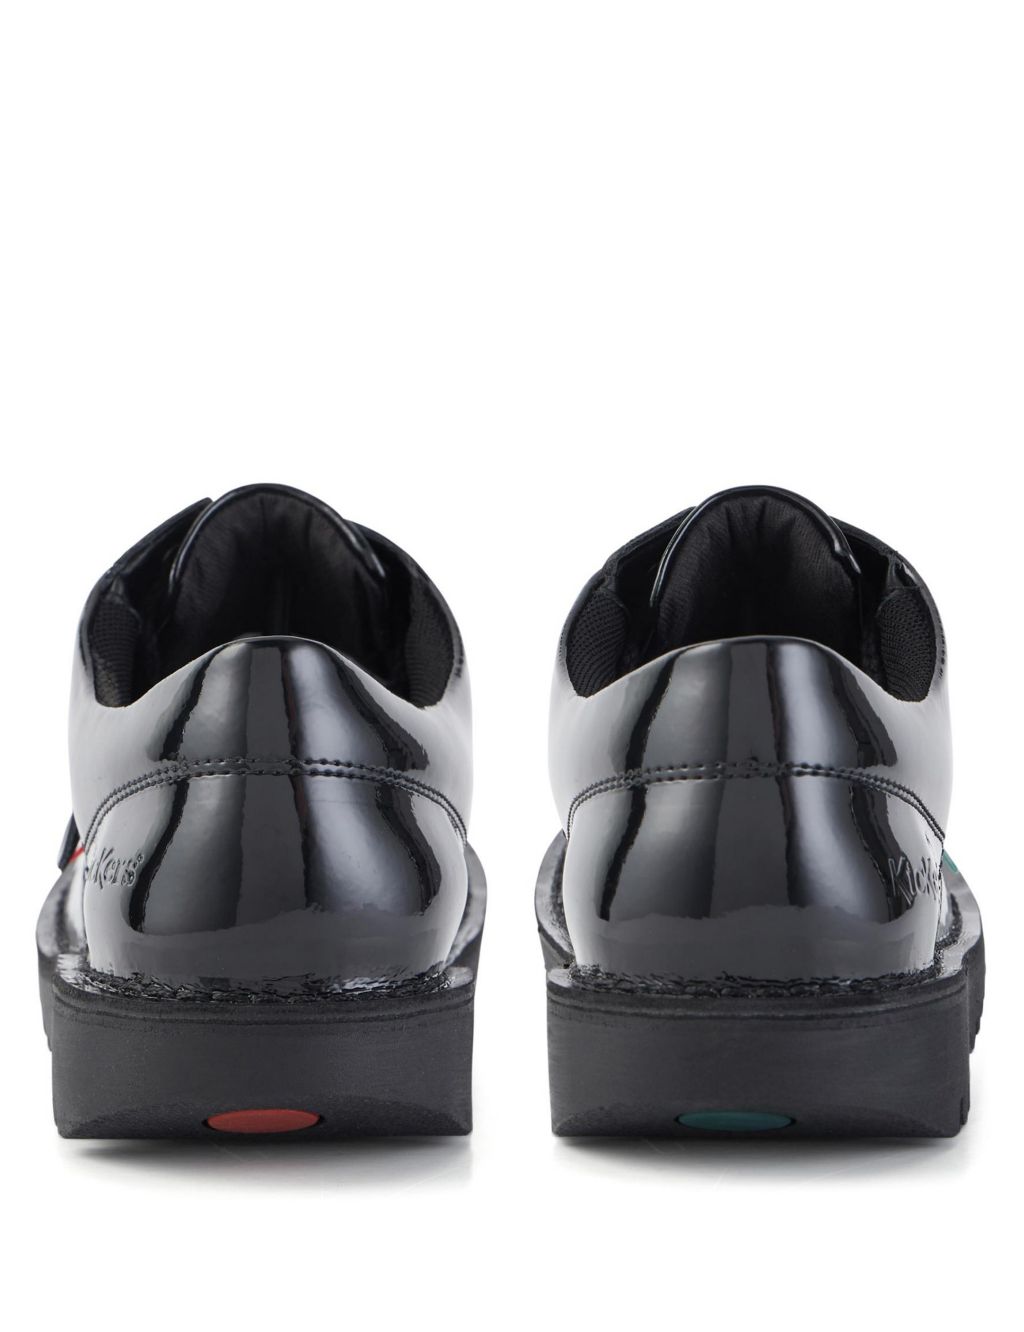 Kids' Patent Leather Lace School Shoes image 3